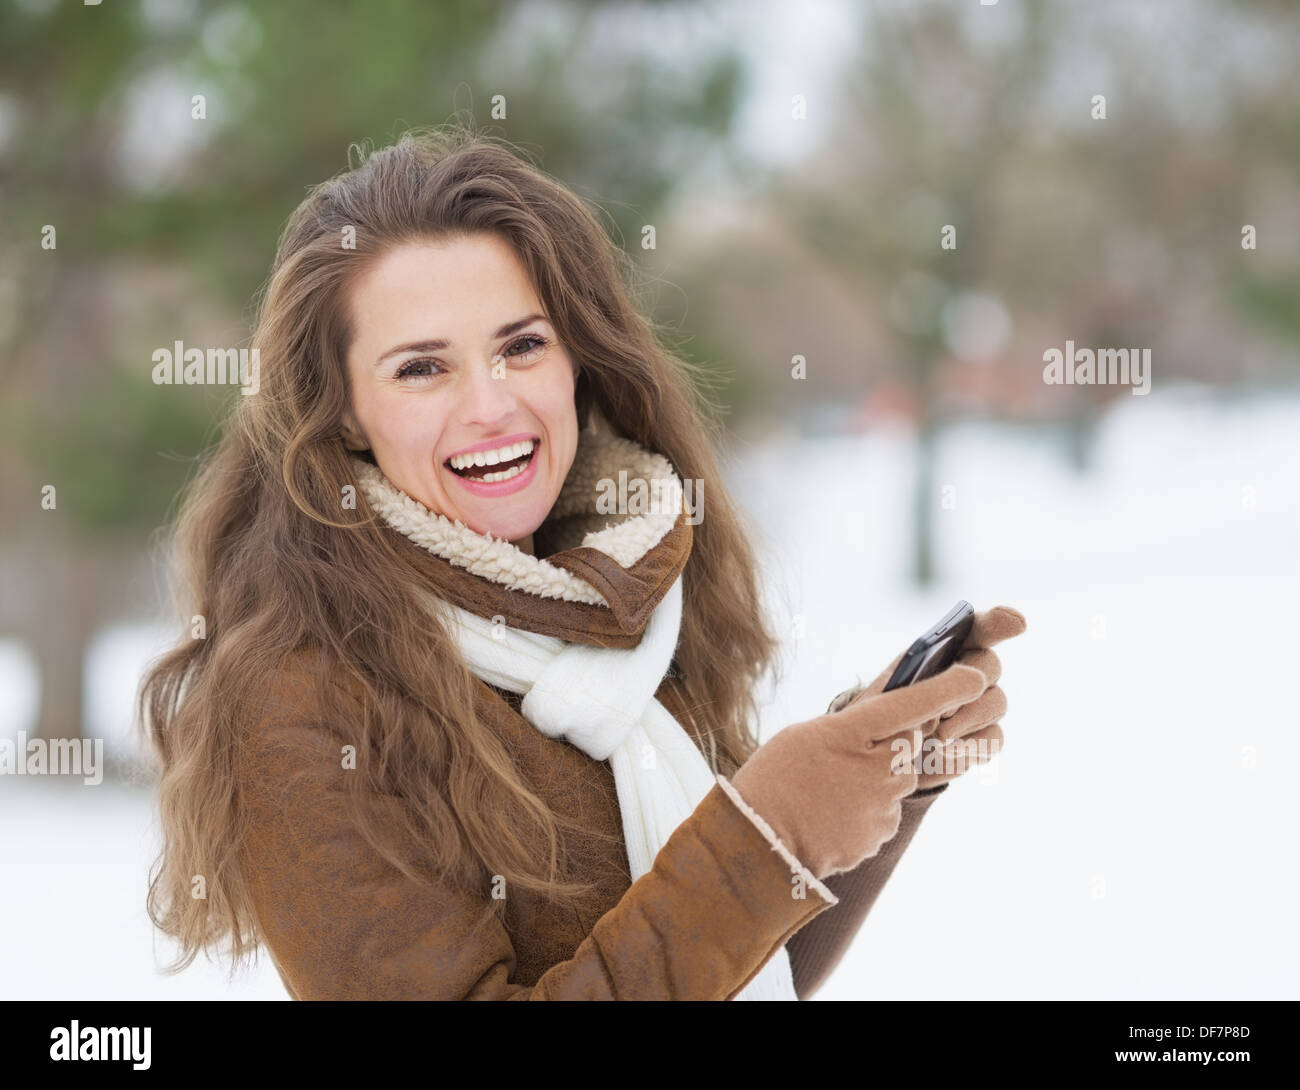 Smiling young woman with cell phone en hiver en plein air Banque D'Images